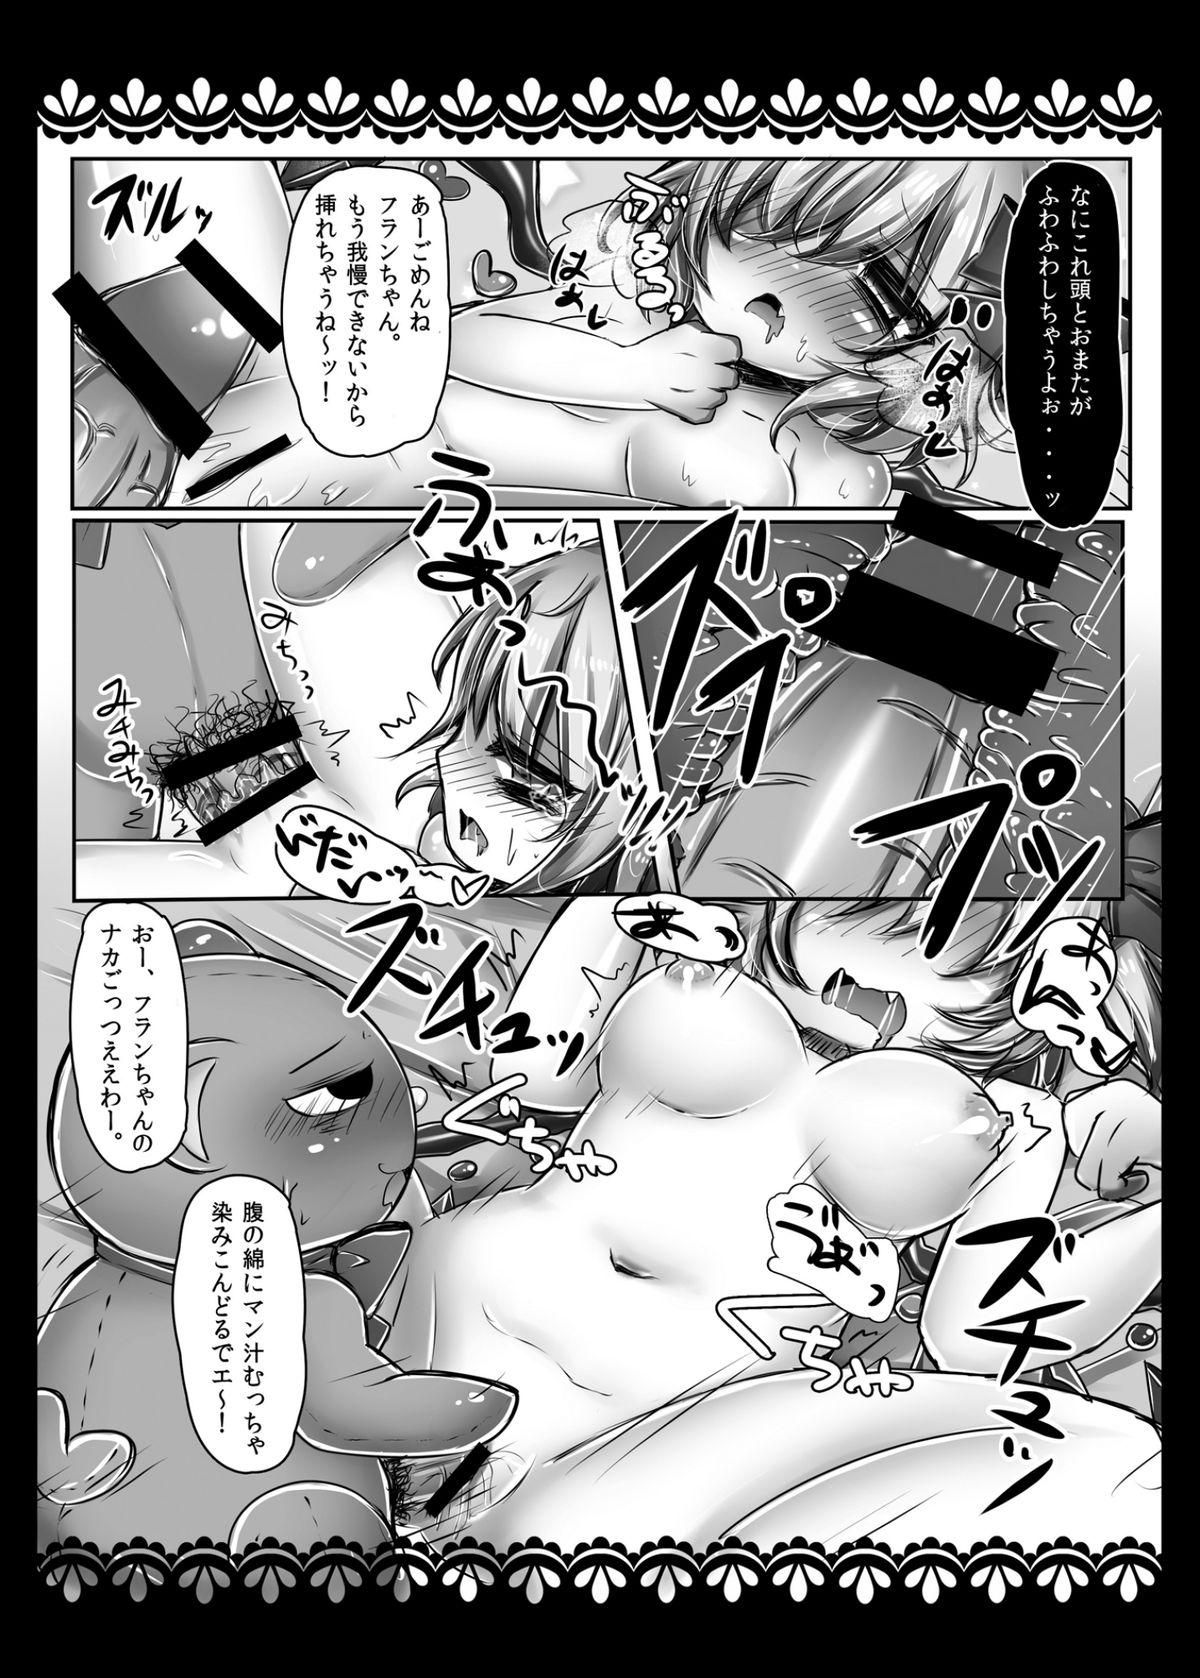 Roughsex Stuffed Animal Paco - Touhou project Granny - Page 10